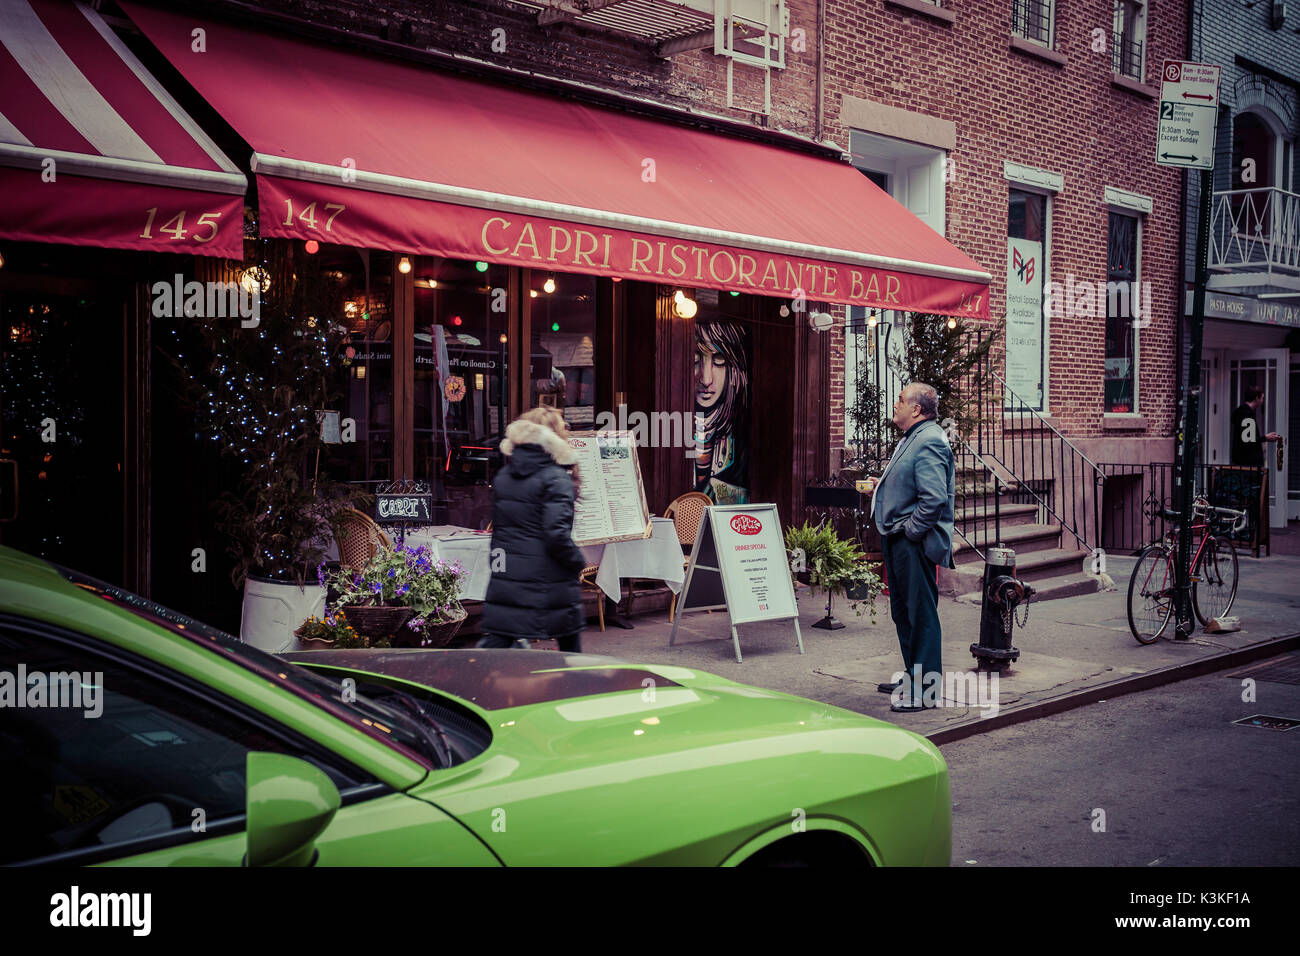 Italian man and a green Chevrolet Camaro, in front of a Pizzeria, Little Italy, Manhatten, New York, USA Stock Photo